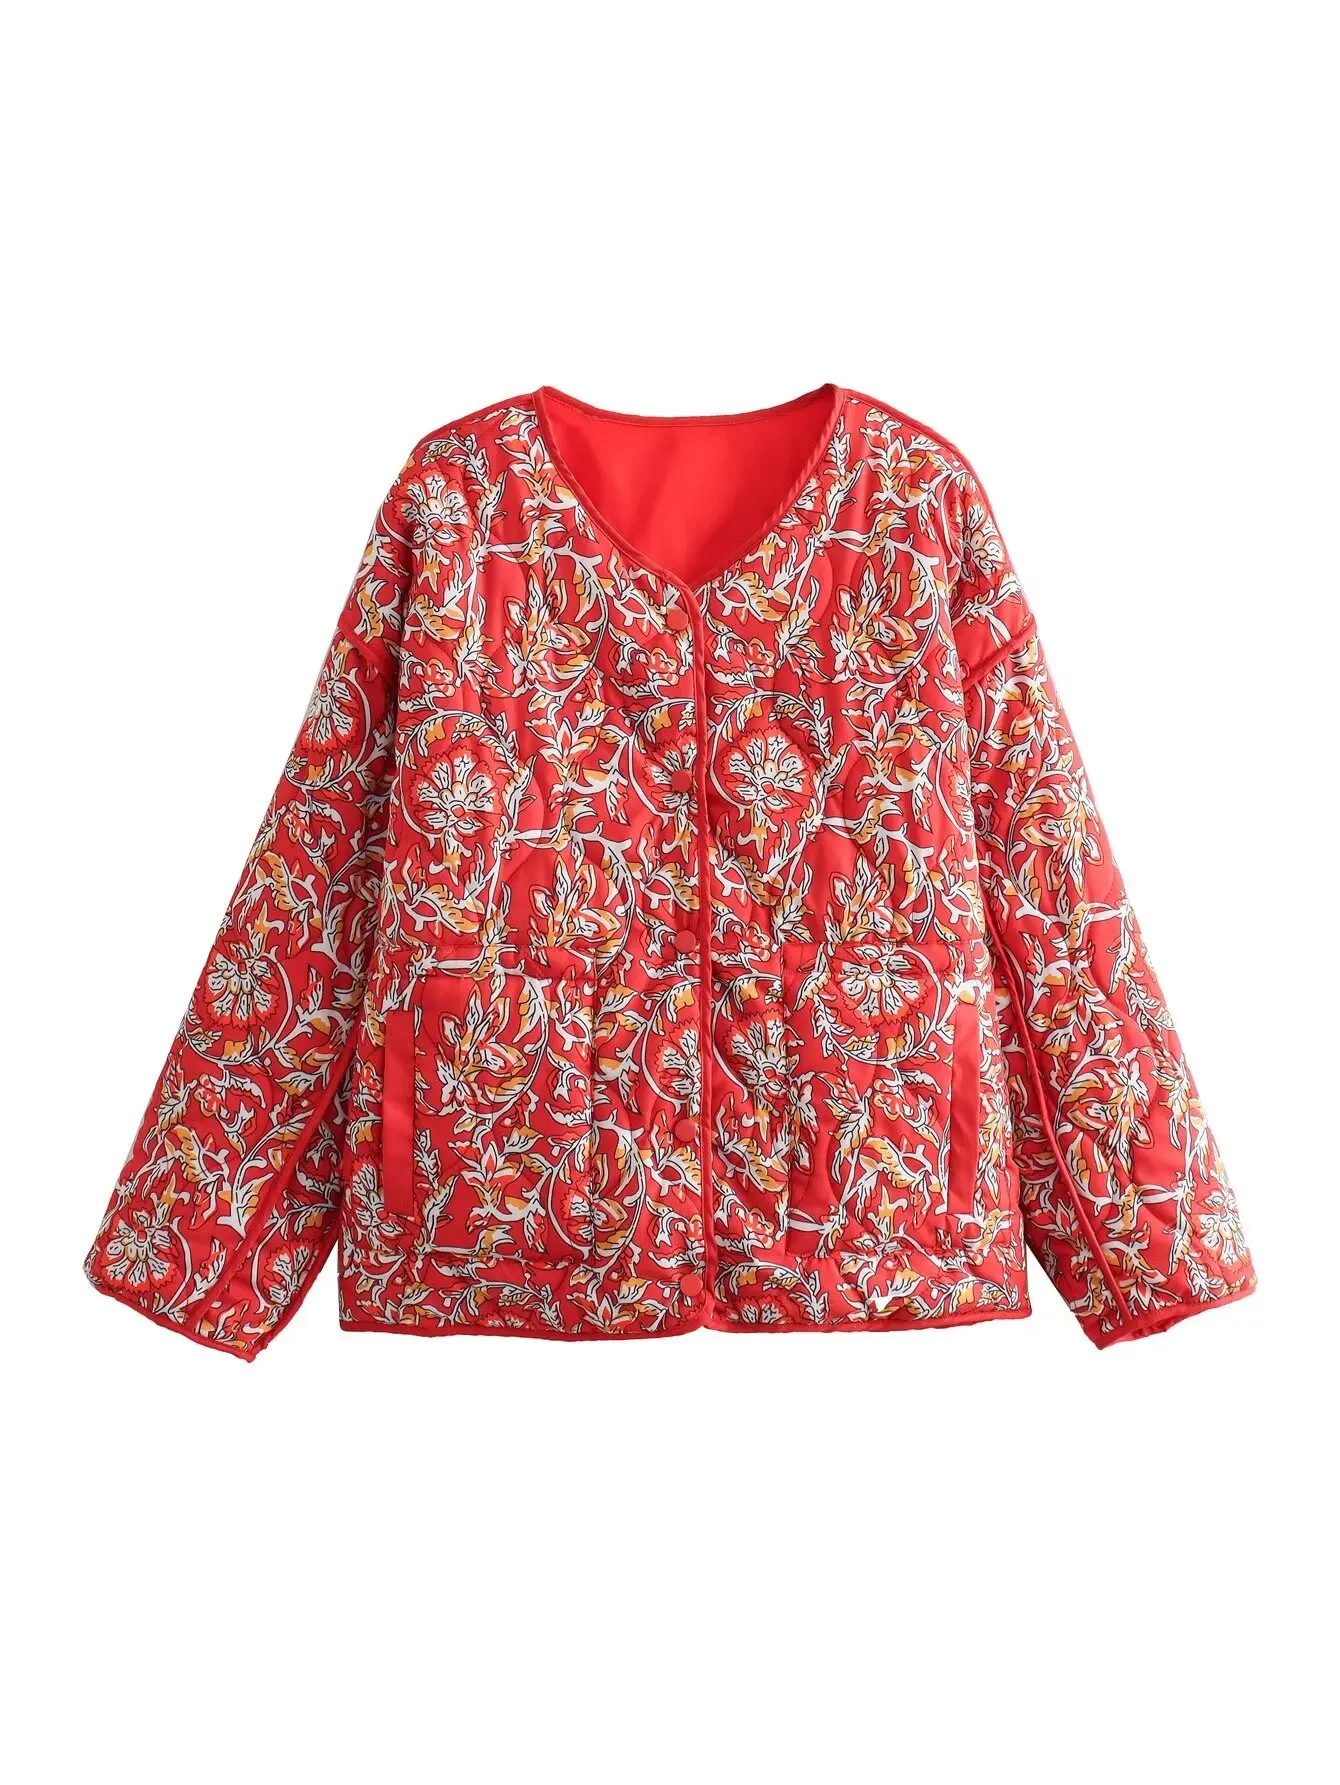 

Plus Size Women's Clothing Collarless Long Sleeves Printed Coat Autumn Winter Red Warm Jacket With Cotton Layer Bust 110-124CM